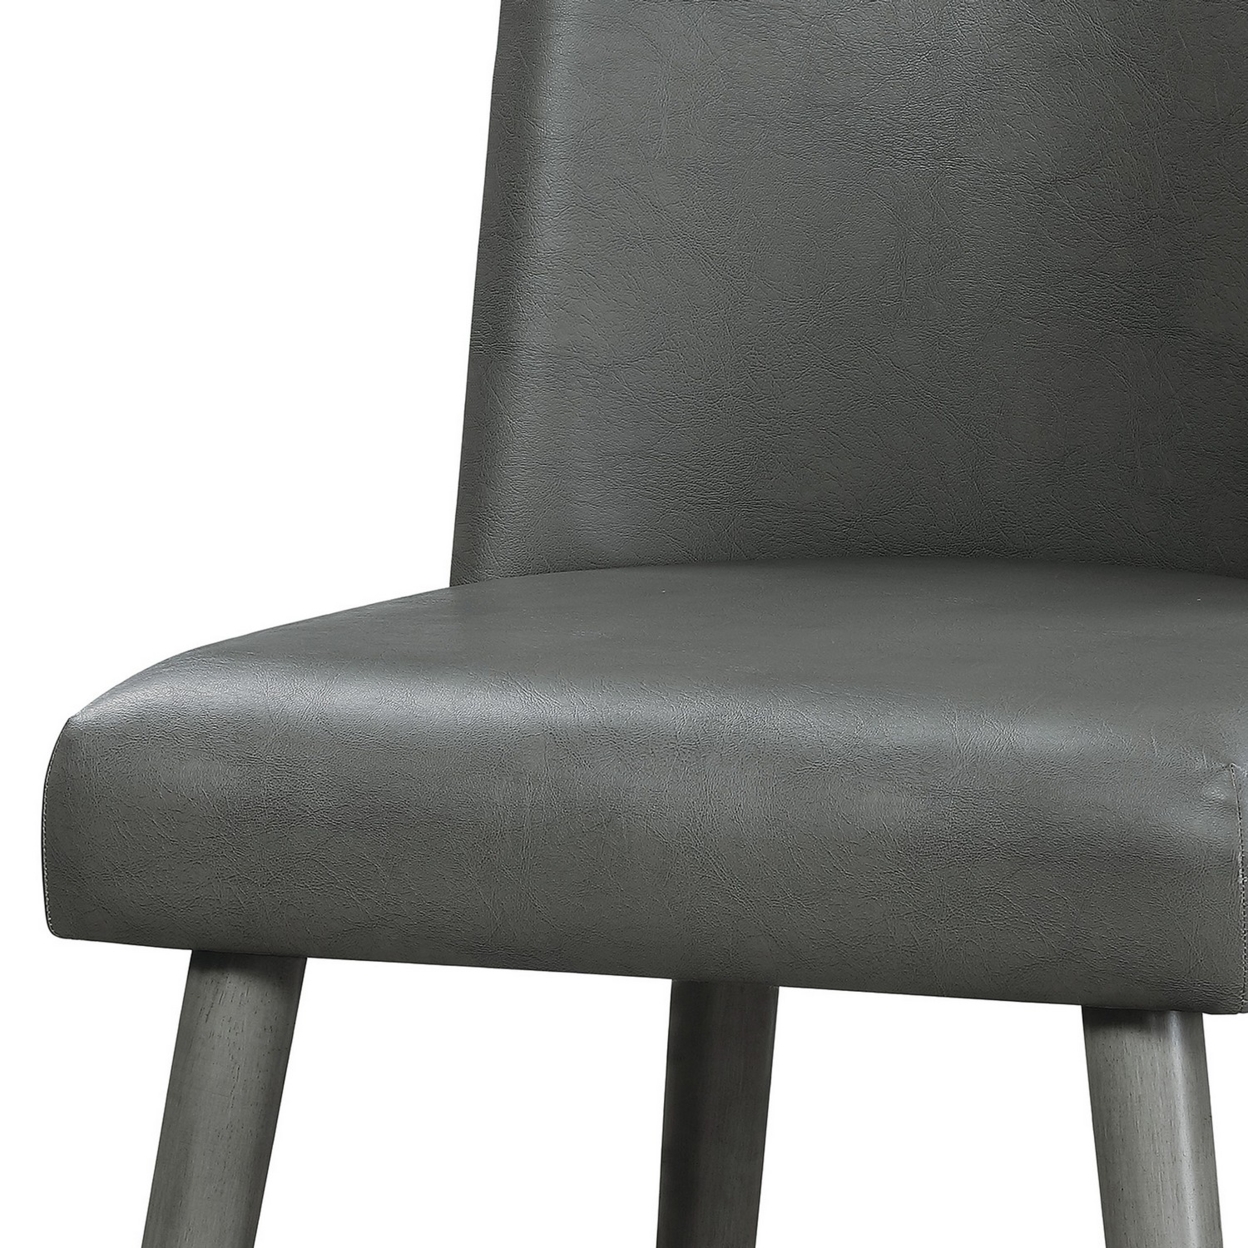 Leatherette Dining Chair With Splayed Wooden Legs, Set Of 2, Gray- Saltoro Sherpi